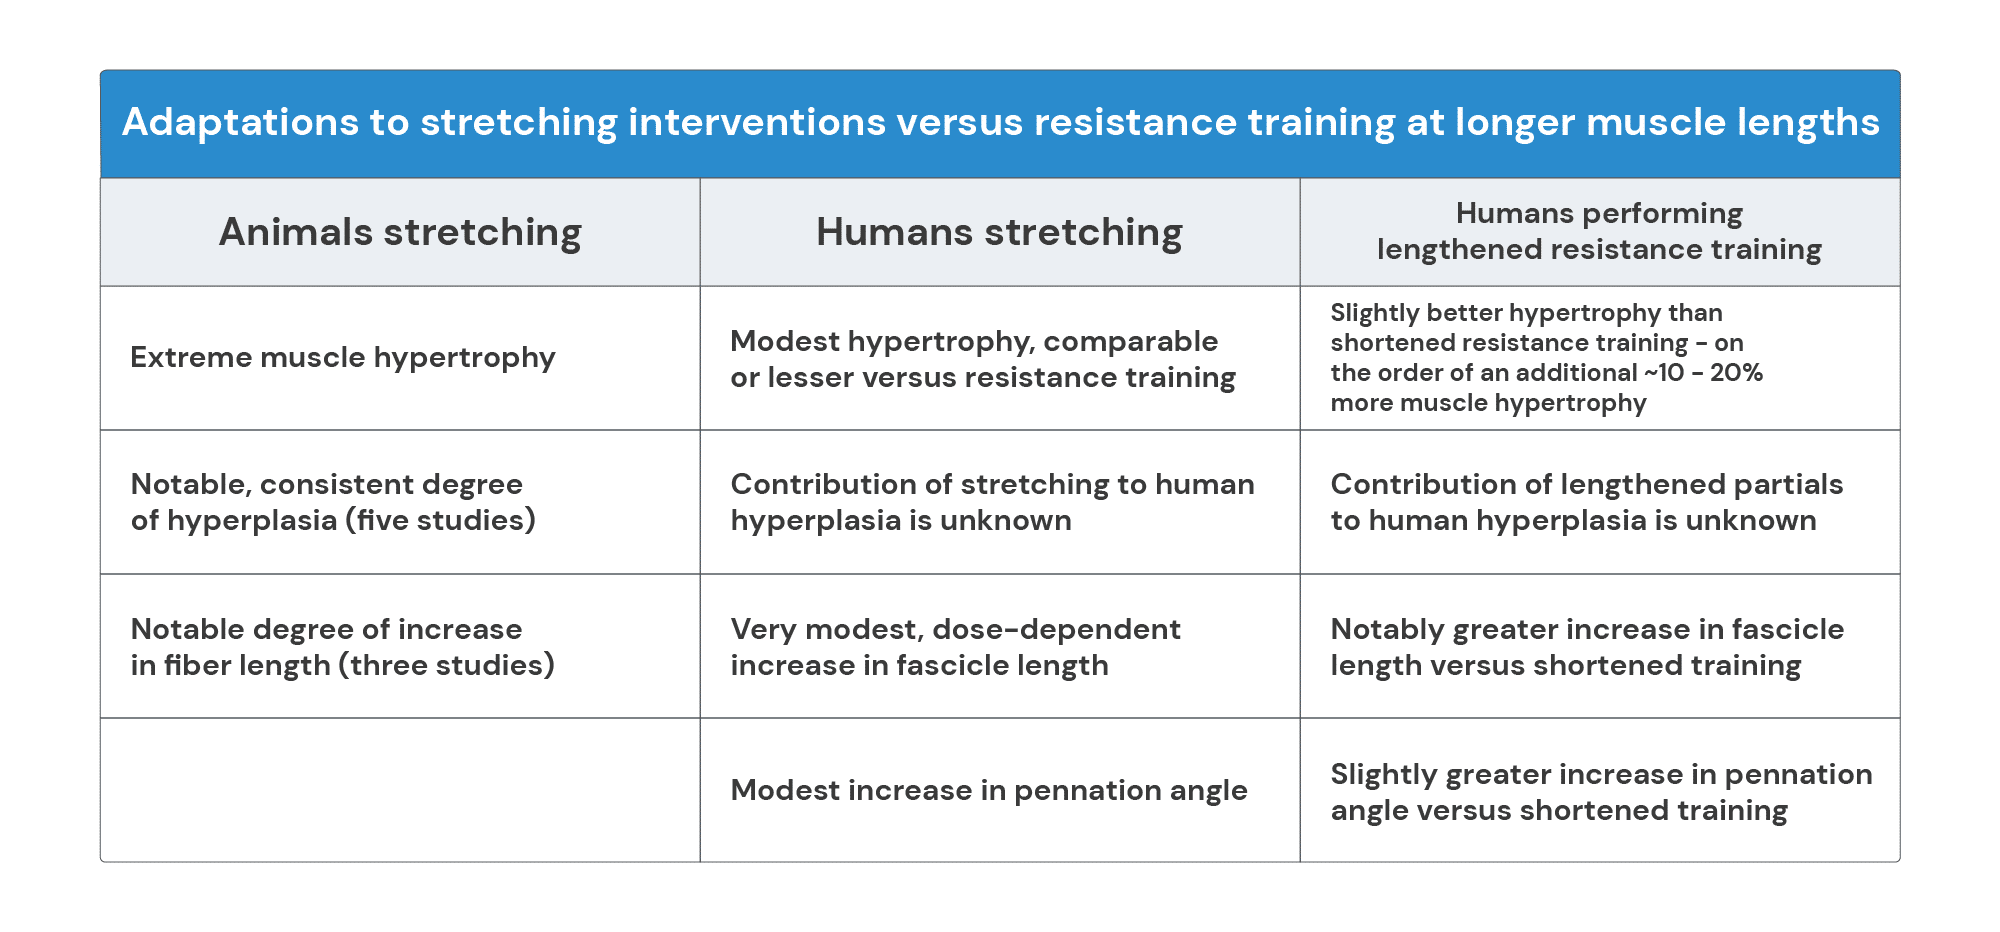 Adaptations to stretching interventions versus resistance training at longer muscle lengths